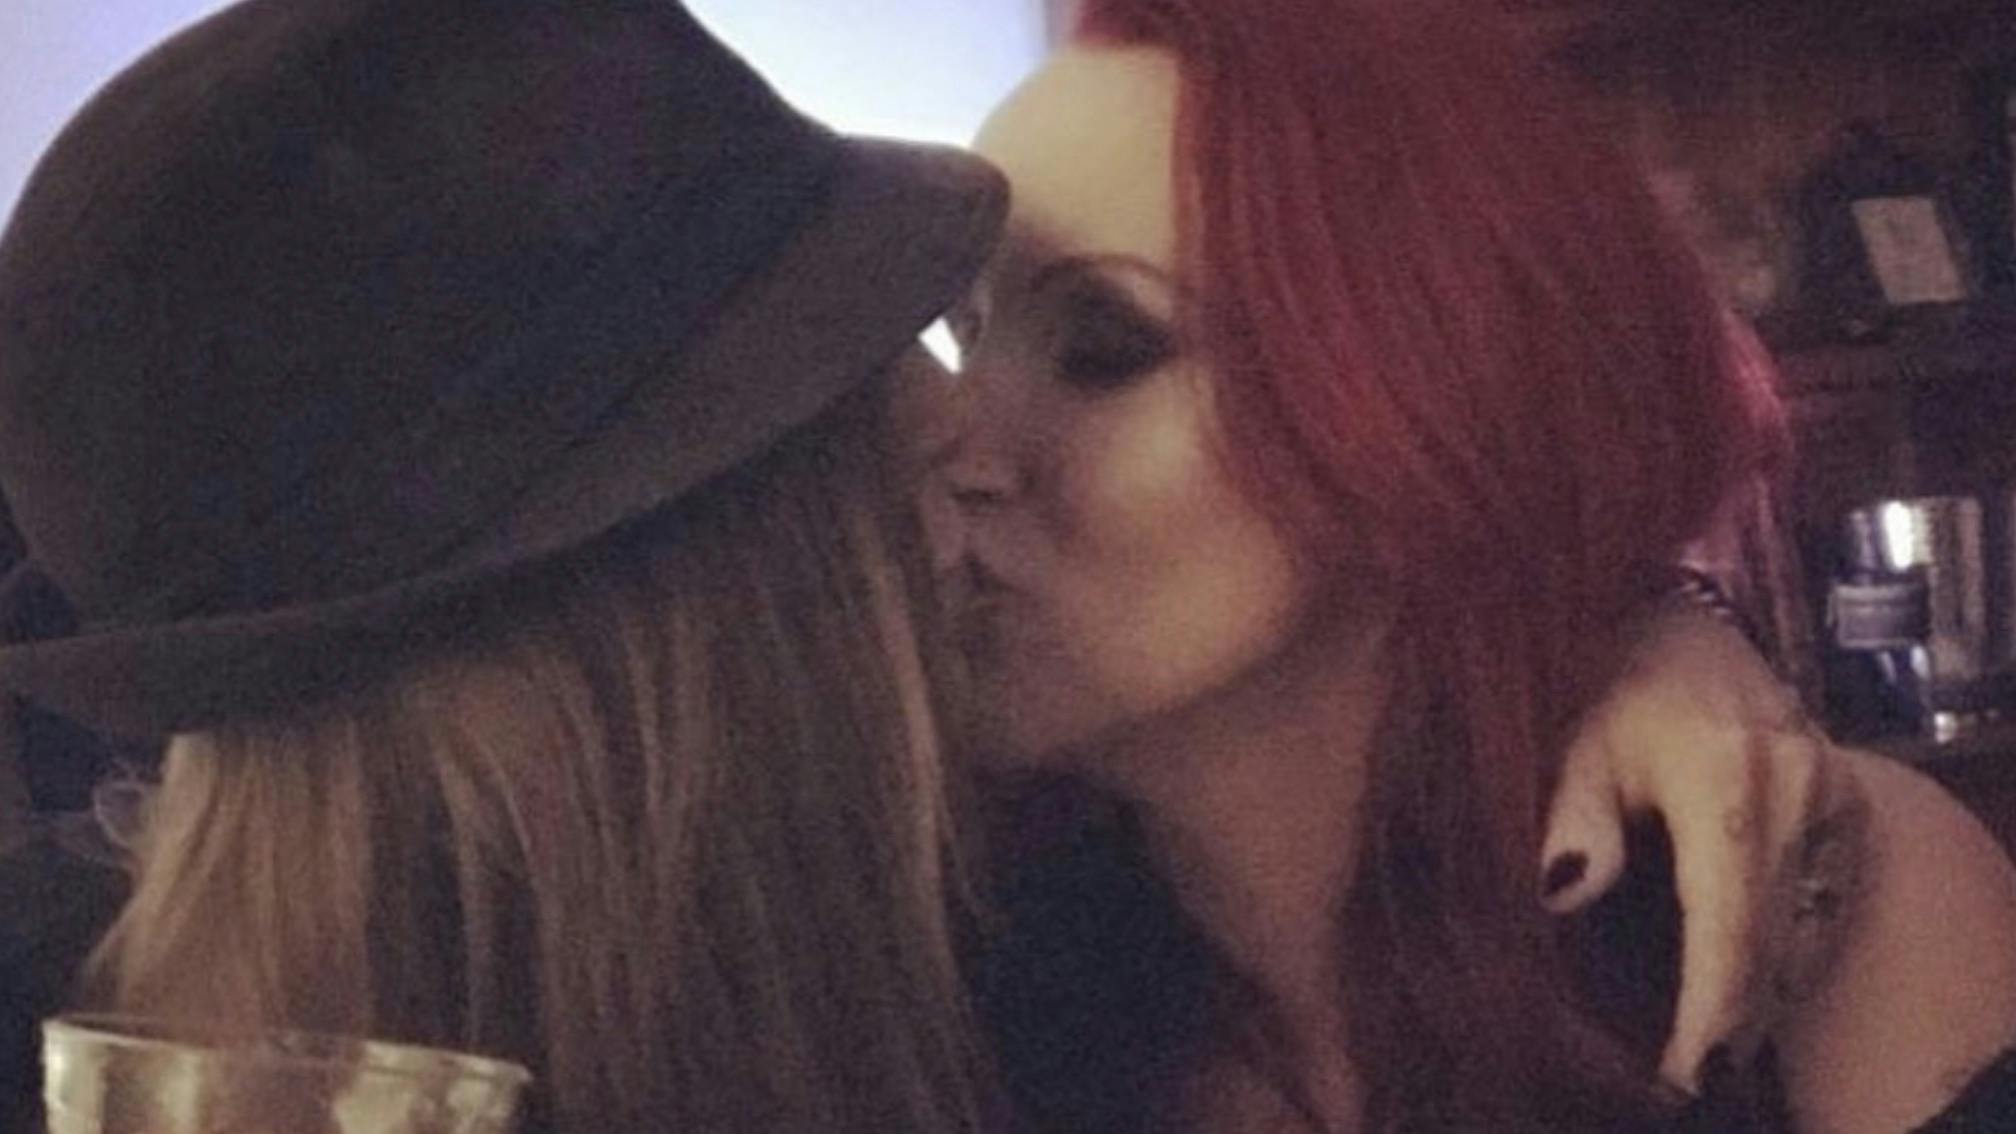 Alexi Laiho's widow Kelli thanks fans for their support as she takes time to grieve "enormous loss"